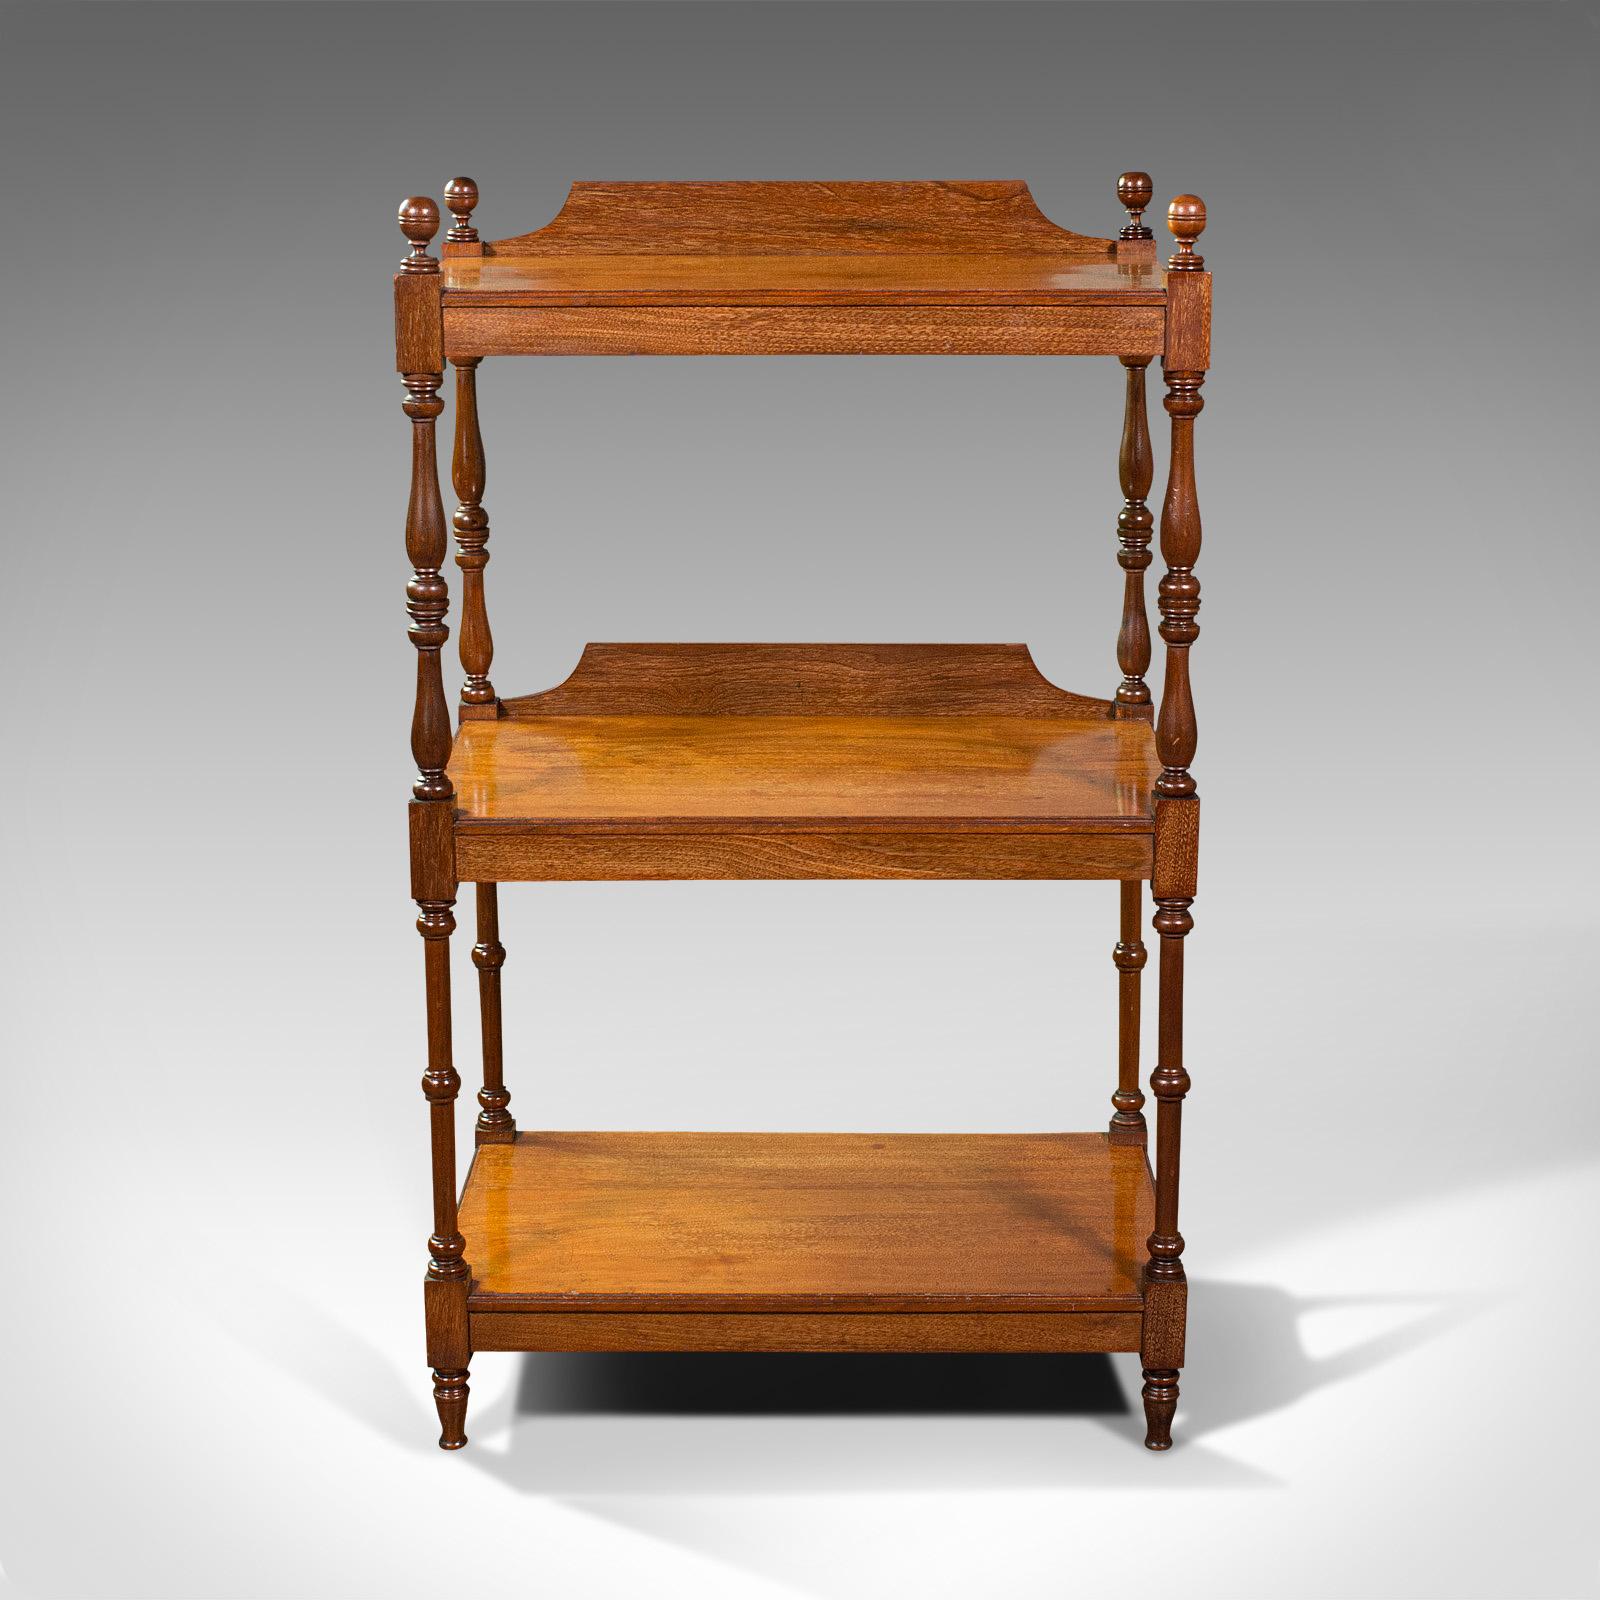 This is an antique 3-tier whatnot. An English, mahogany buffet or display stand, dating to the early Victorian period, circa 1850.

Attractive example of Victorian display furniture
Displays a desirable aged patina throughout
Select mahogany